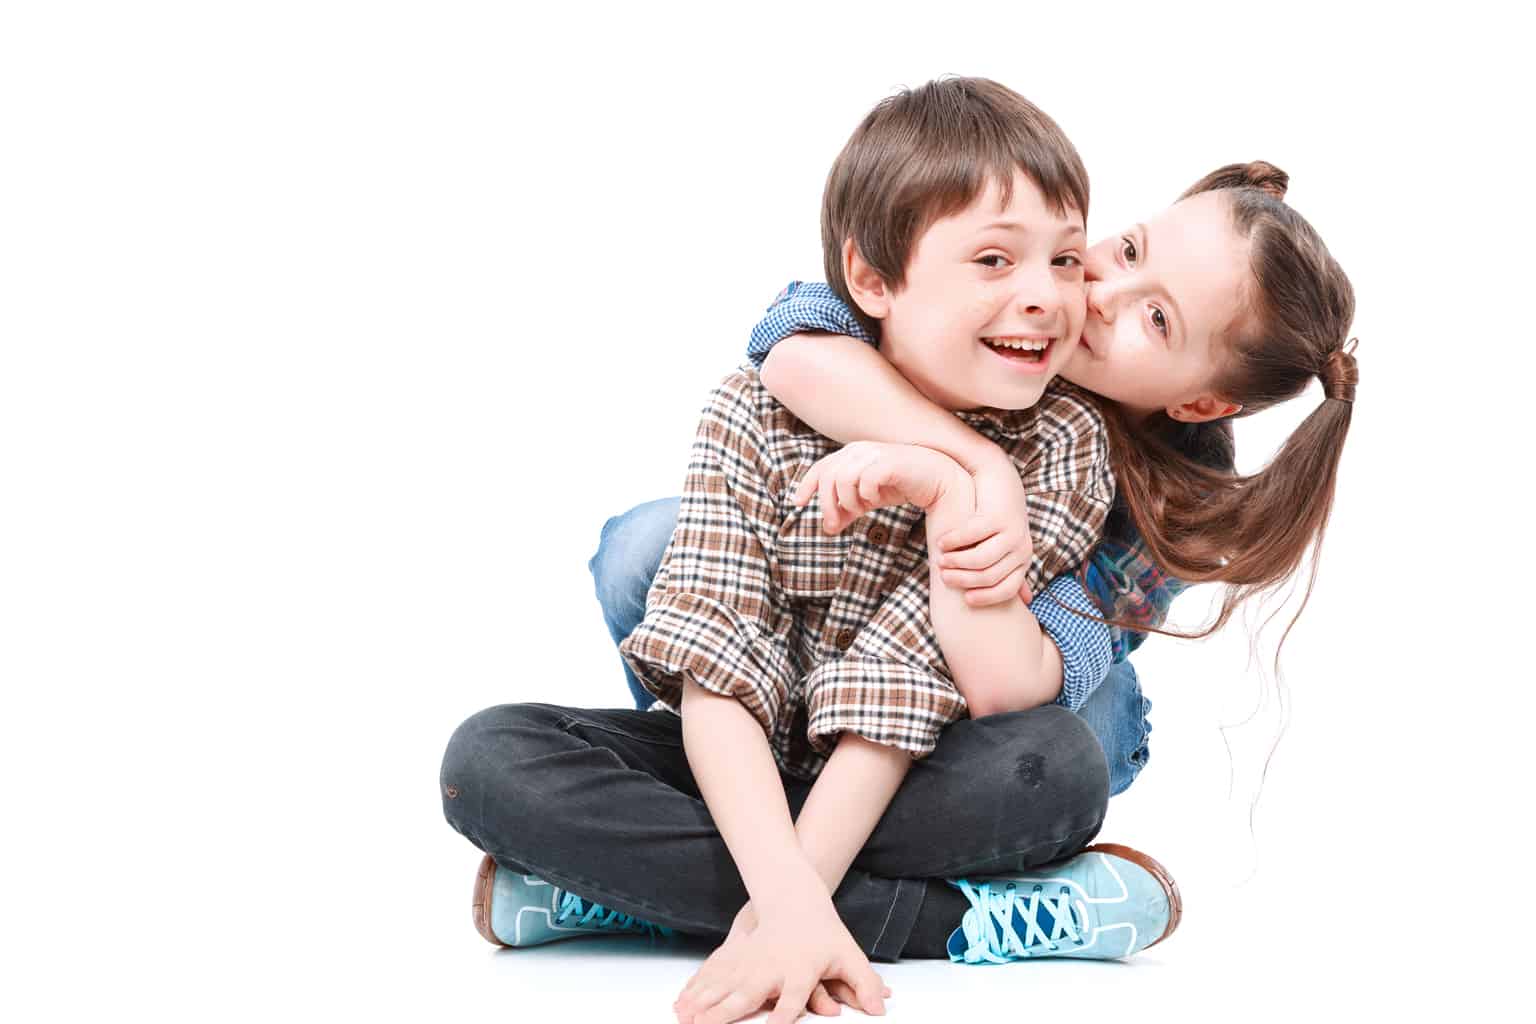 Practical Tips for Building Healthy Sibling Relationships